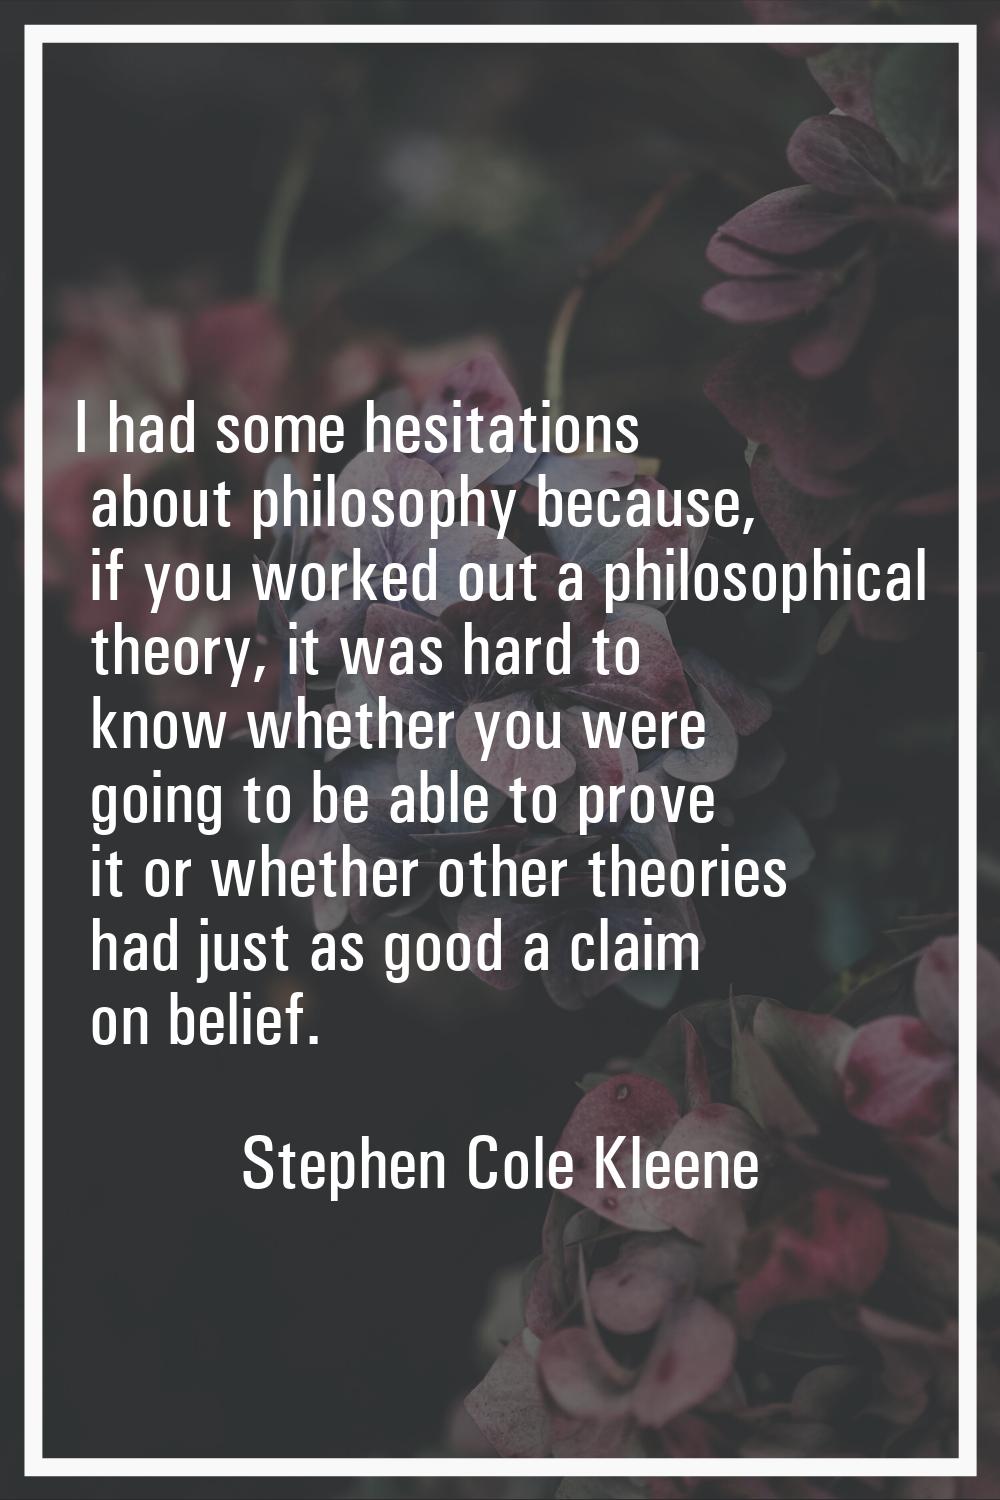 I had some hesitations about philosophy because, if you worked out a philosophical theory, it was h